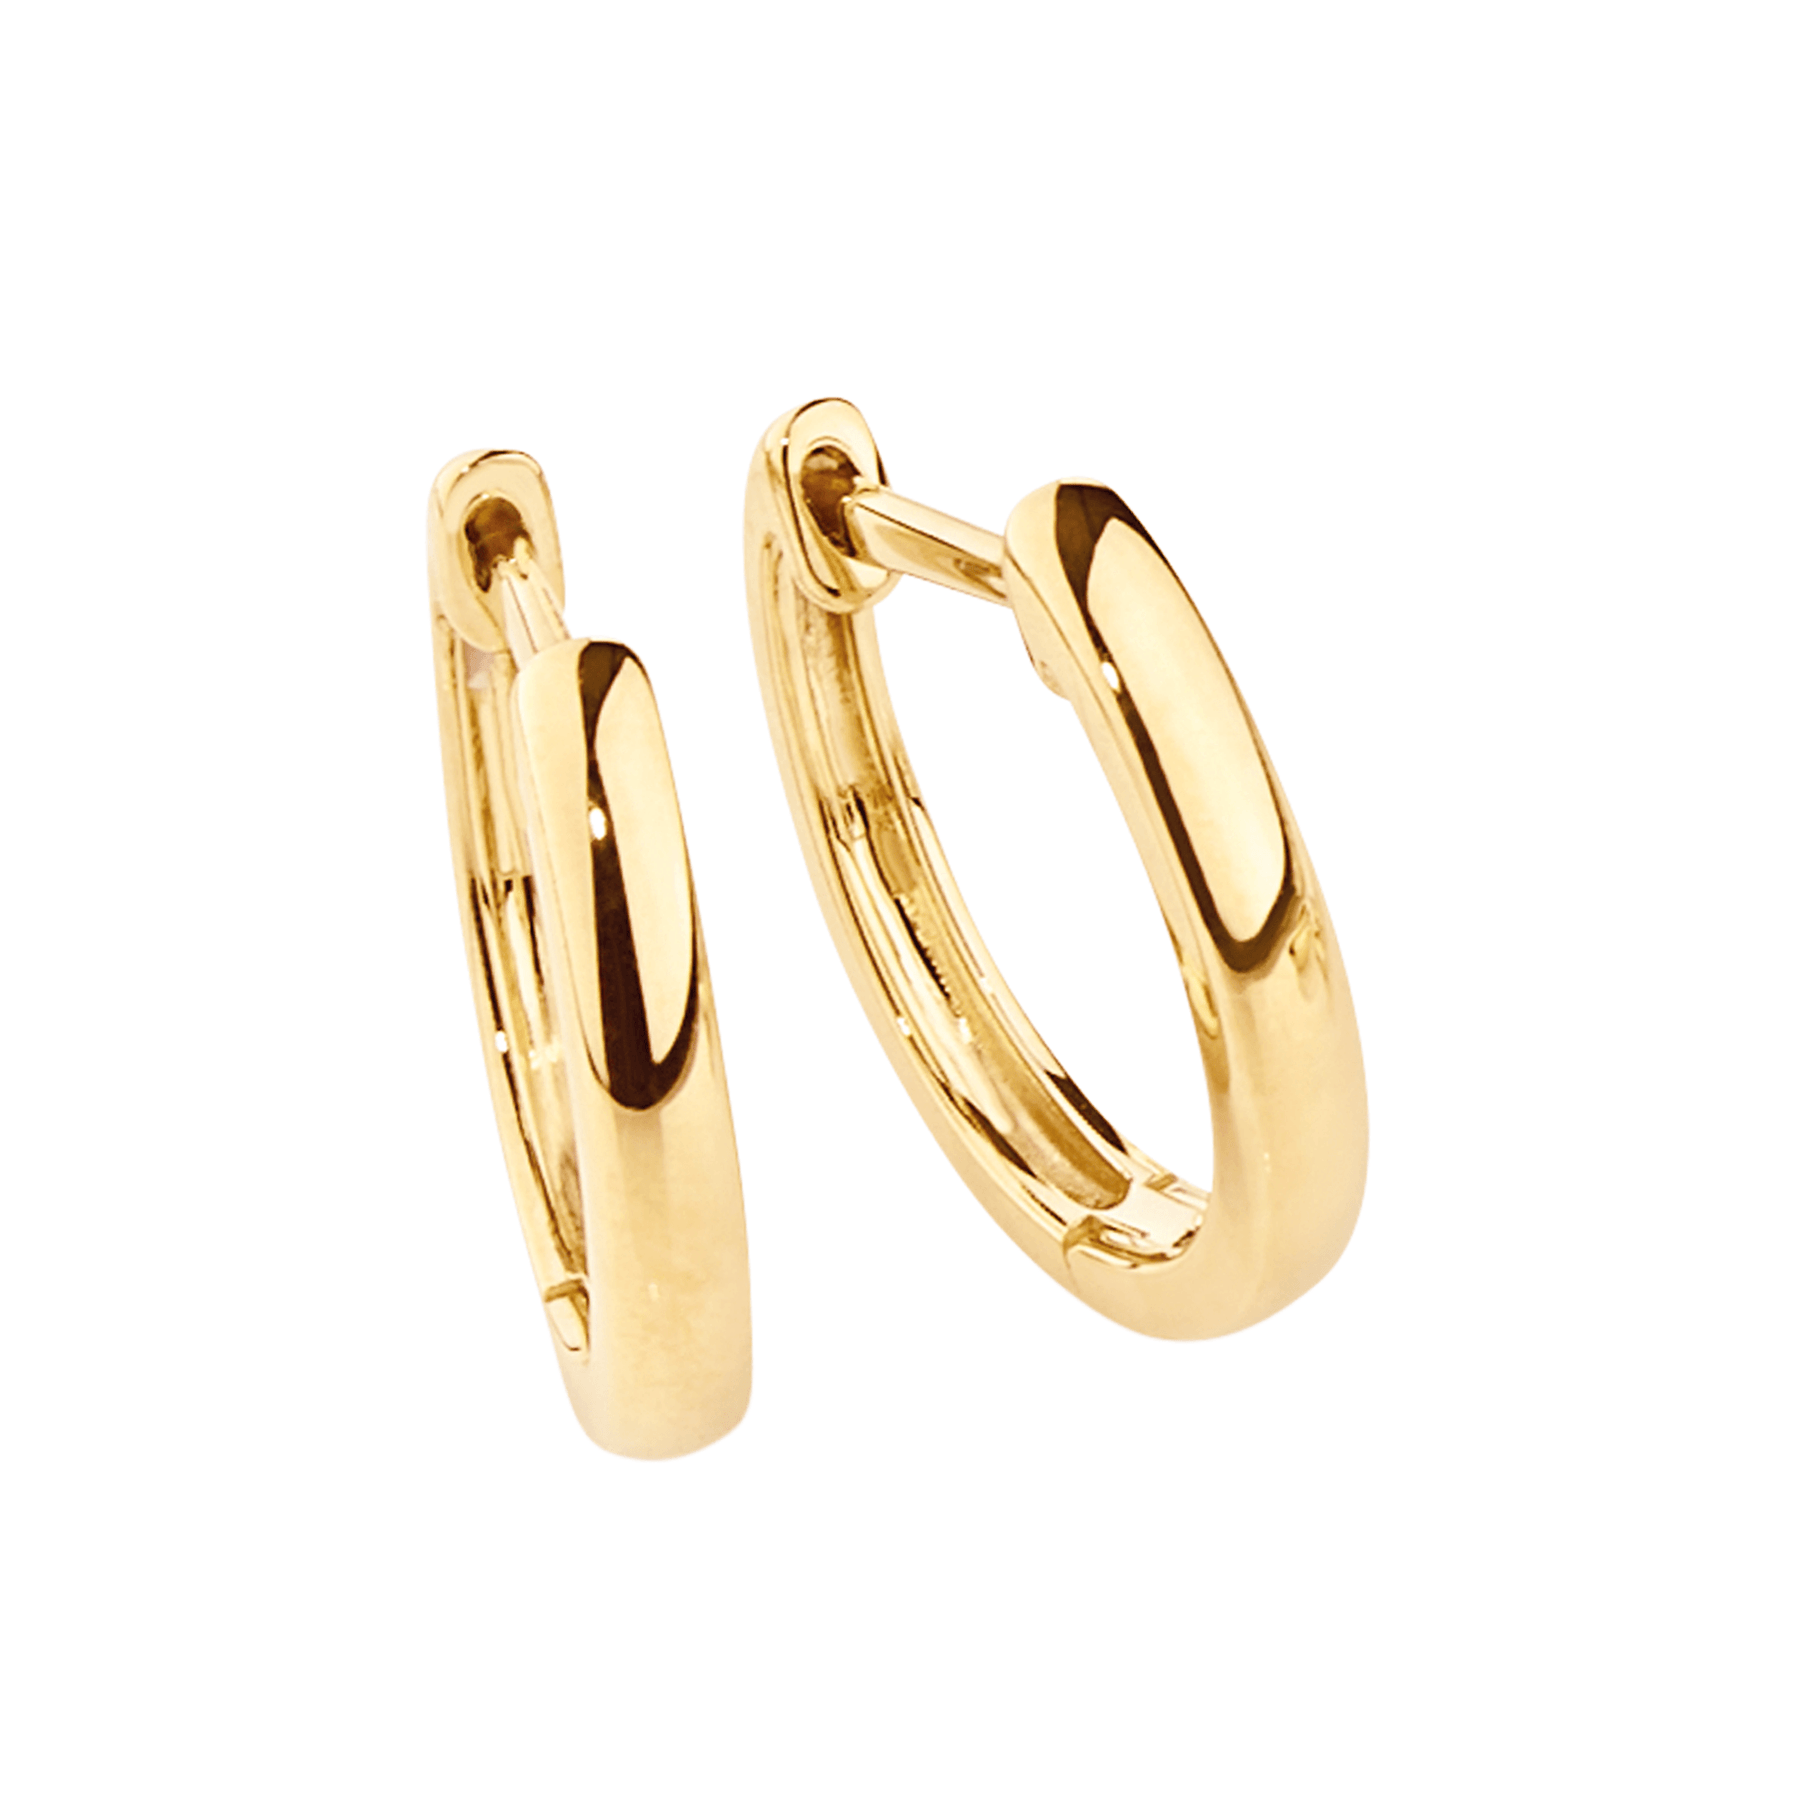 Oval Shaped Huggie Hoop Earrings in 9ct Yellow Gold - Wallace Bishop